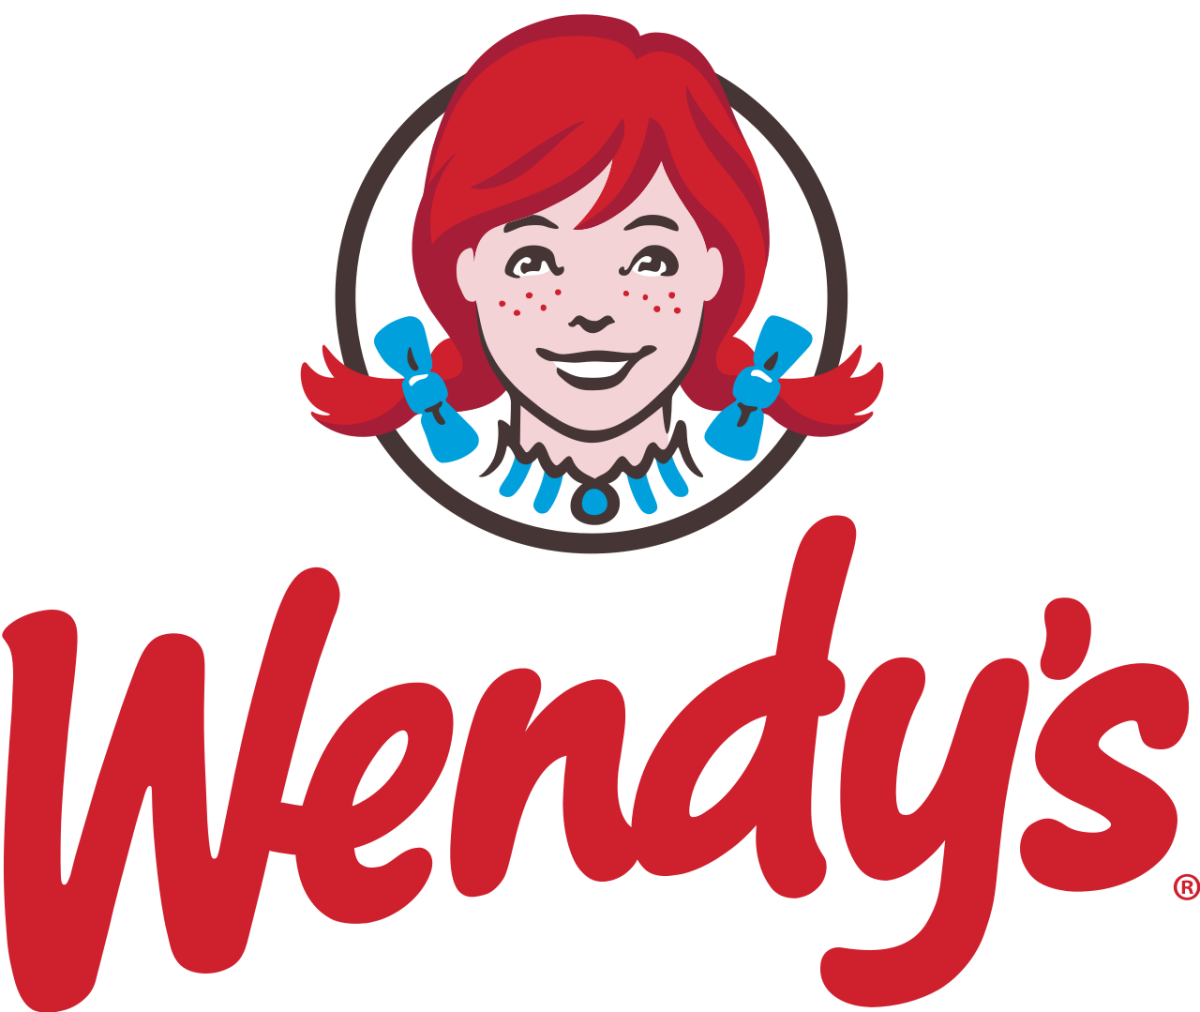 Wendy’s Logo by Wendy’s is licensed under CC BY-SA 4.0.